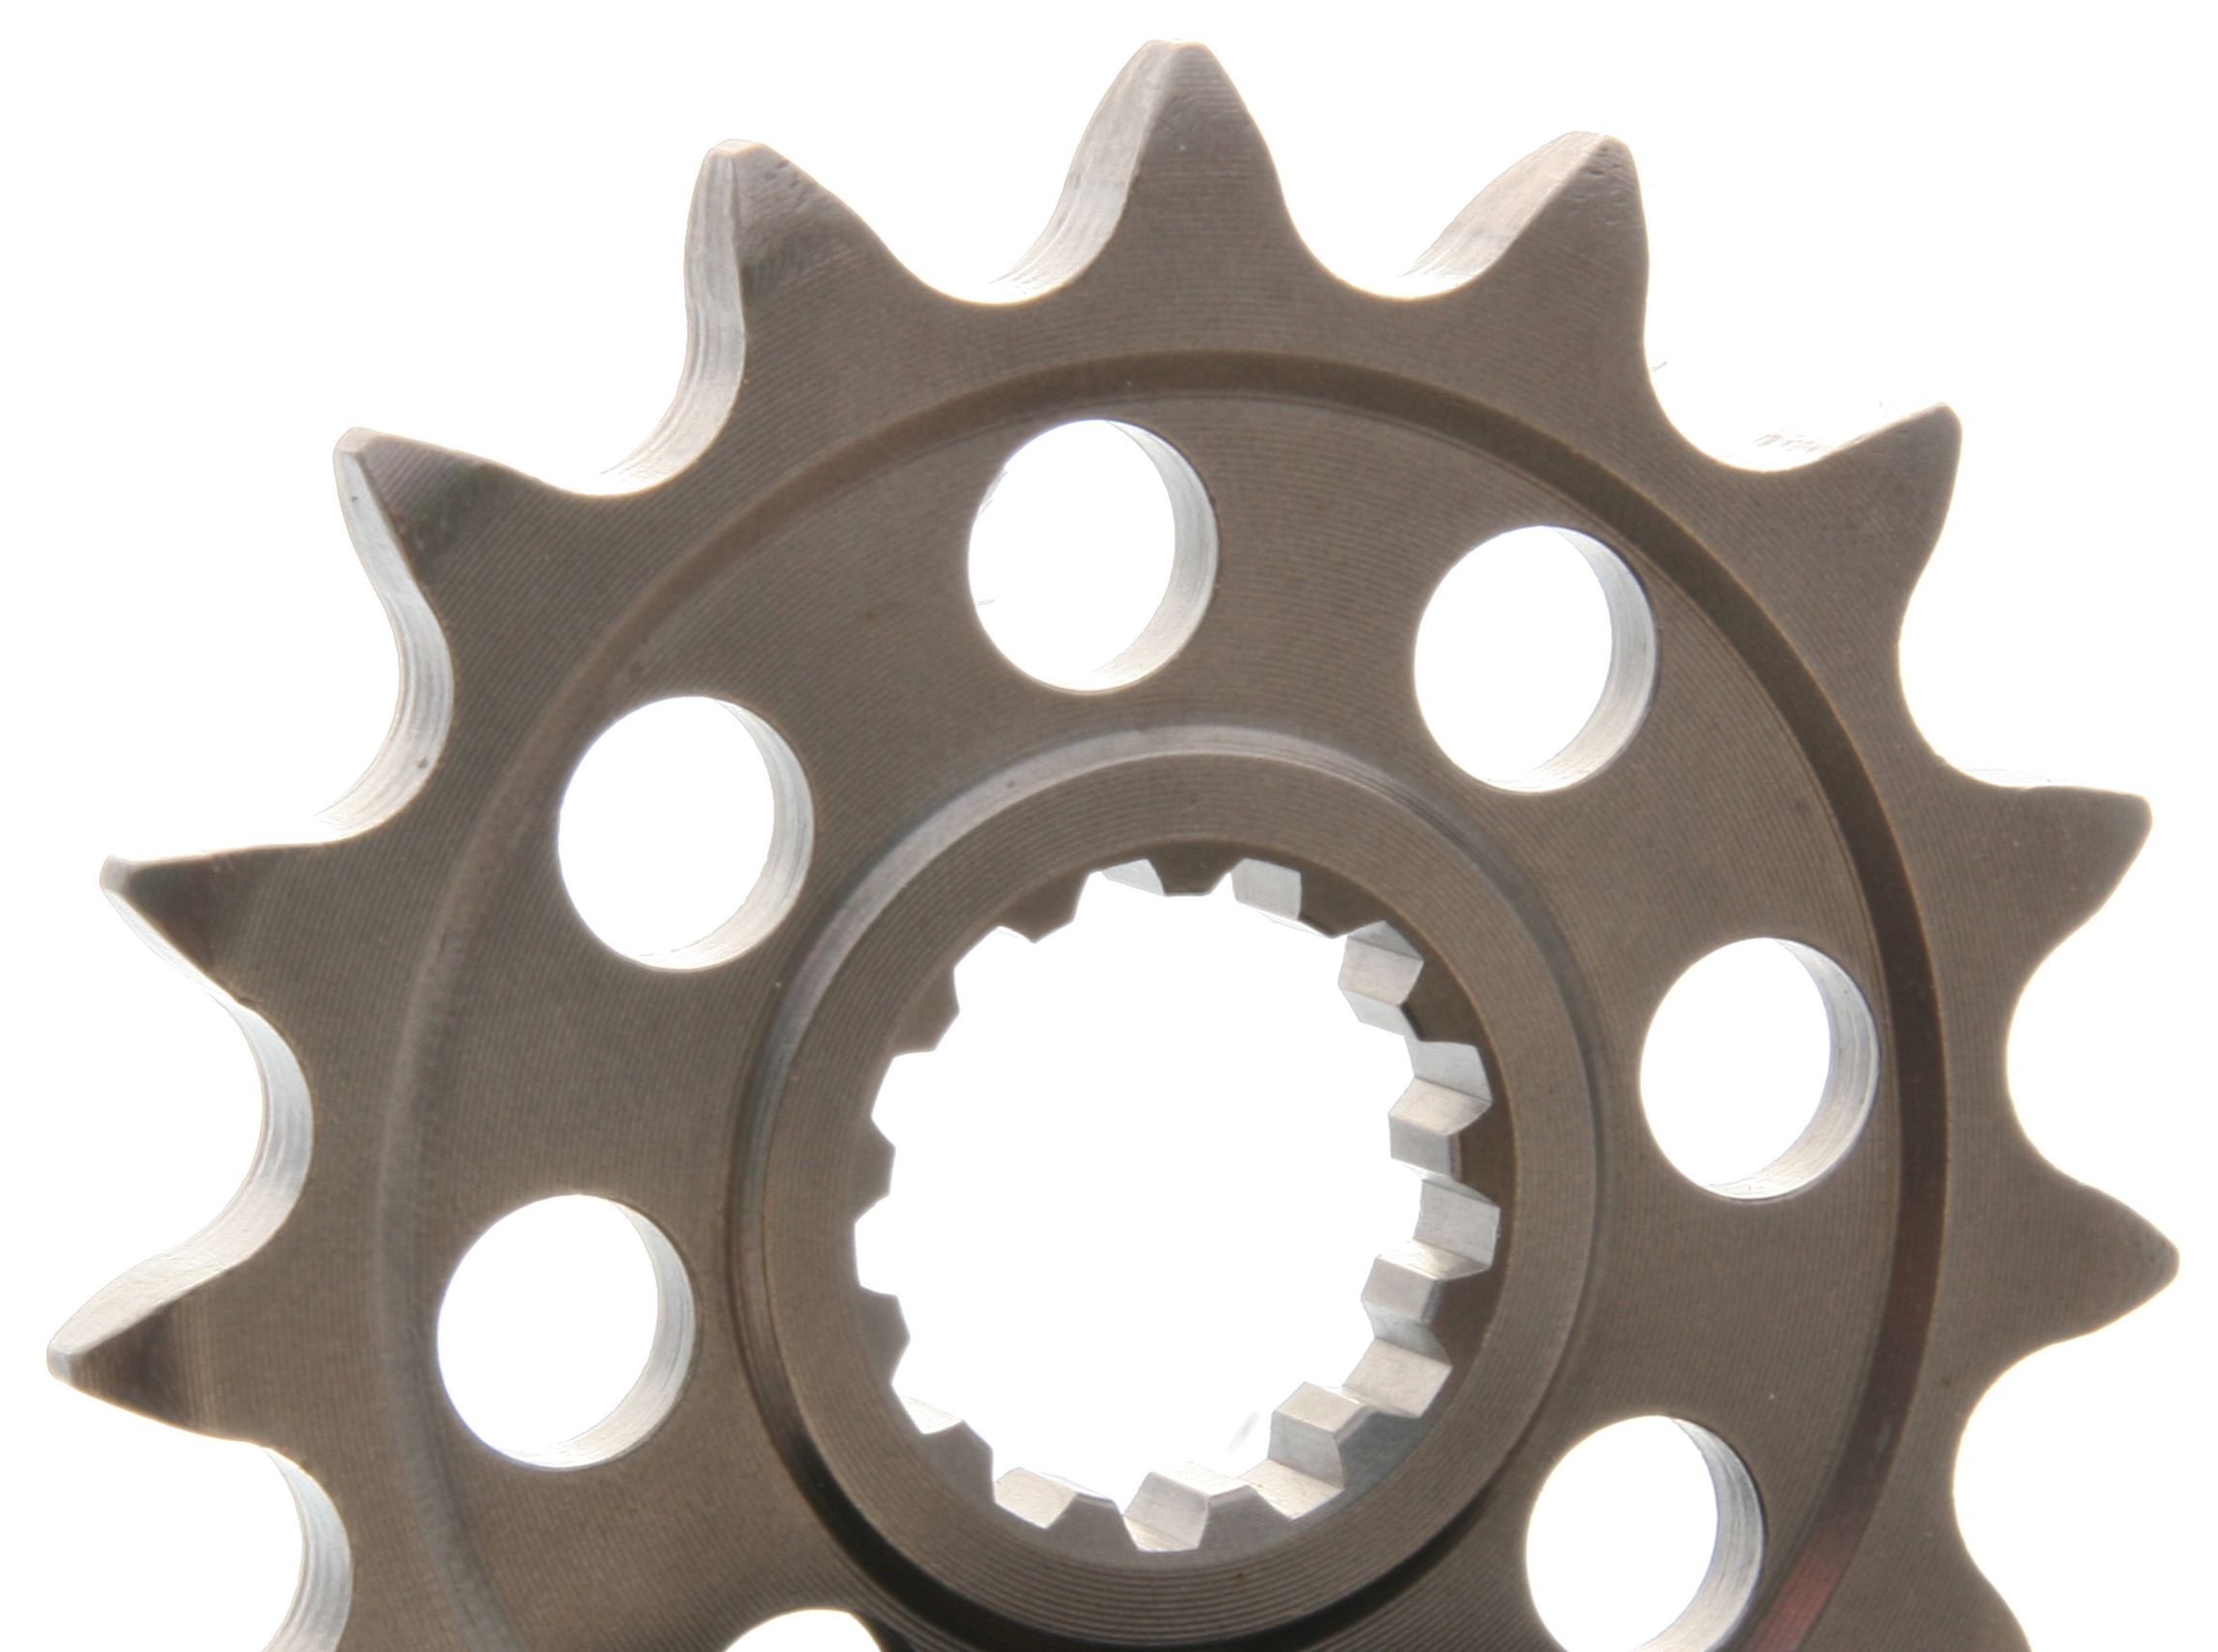 Renthal 15 T Front Sprocket 385U-520-15 for Kawasaki ZX10R 2004-2015 520 Pitch